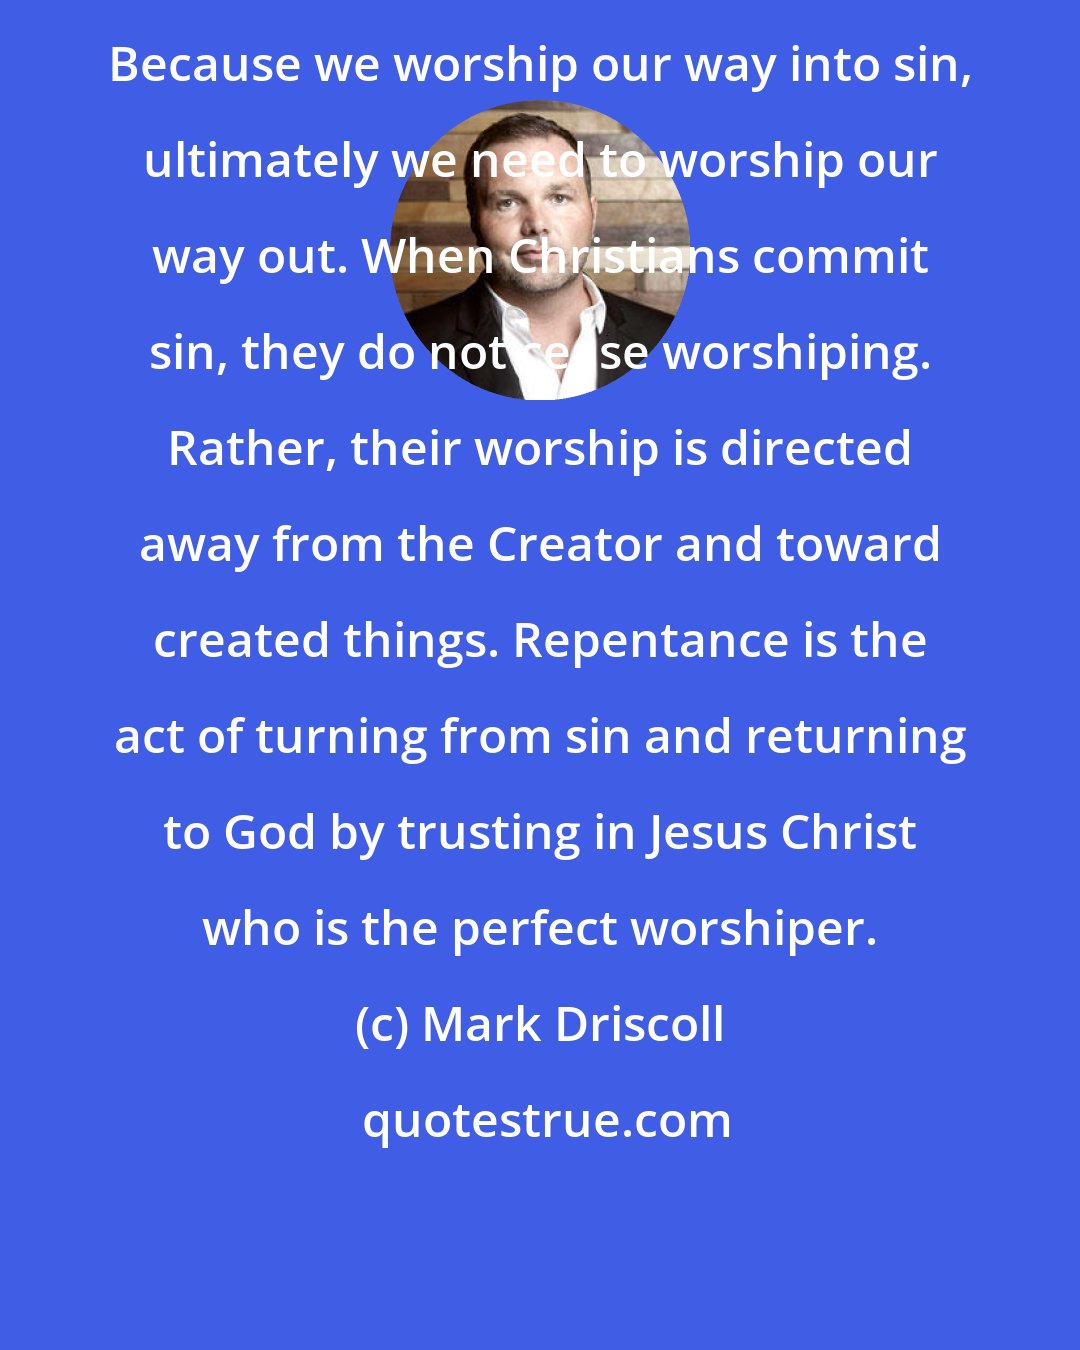 Mark Driscoll: Because we worship our way into sin, ultimately we need to worship our way out. When Christians commit sin, they do not cease worshiping. Rather, their worship is directed away from the Creator and toward created things. Repentance is the act of turning from sin and returning to God by trusting in Jesus Christ who is the perfect worshiper.